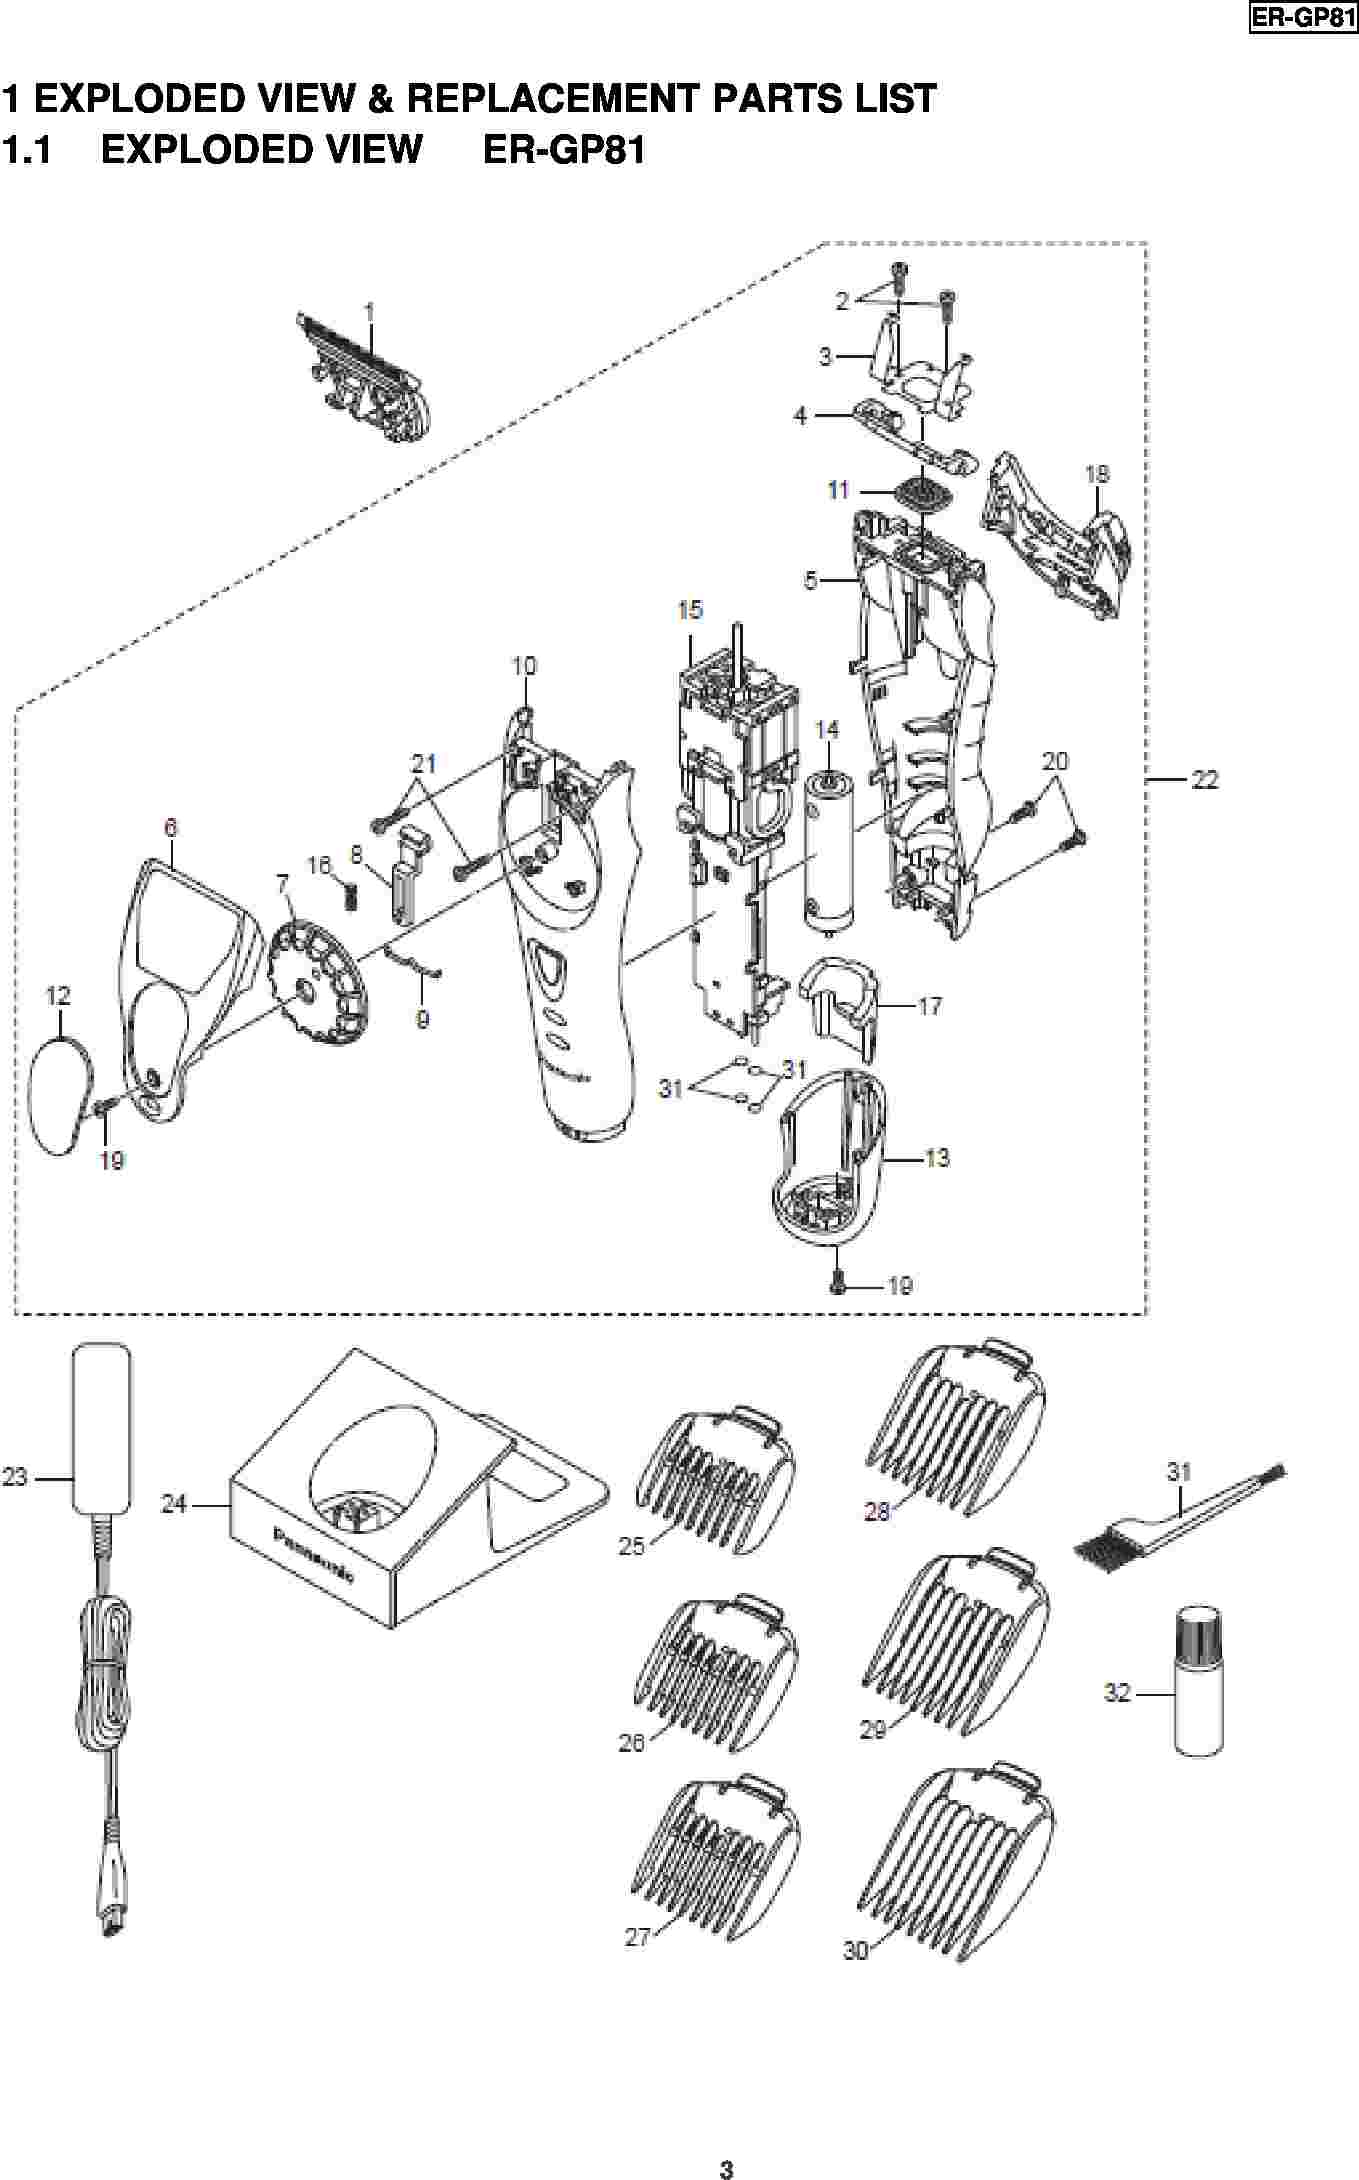 ER-GP81: Exploded View